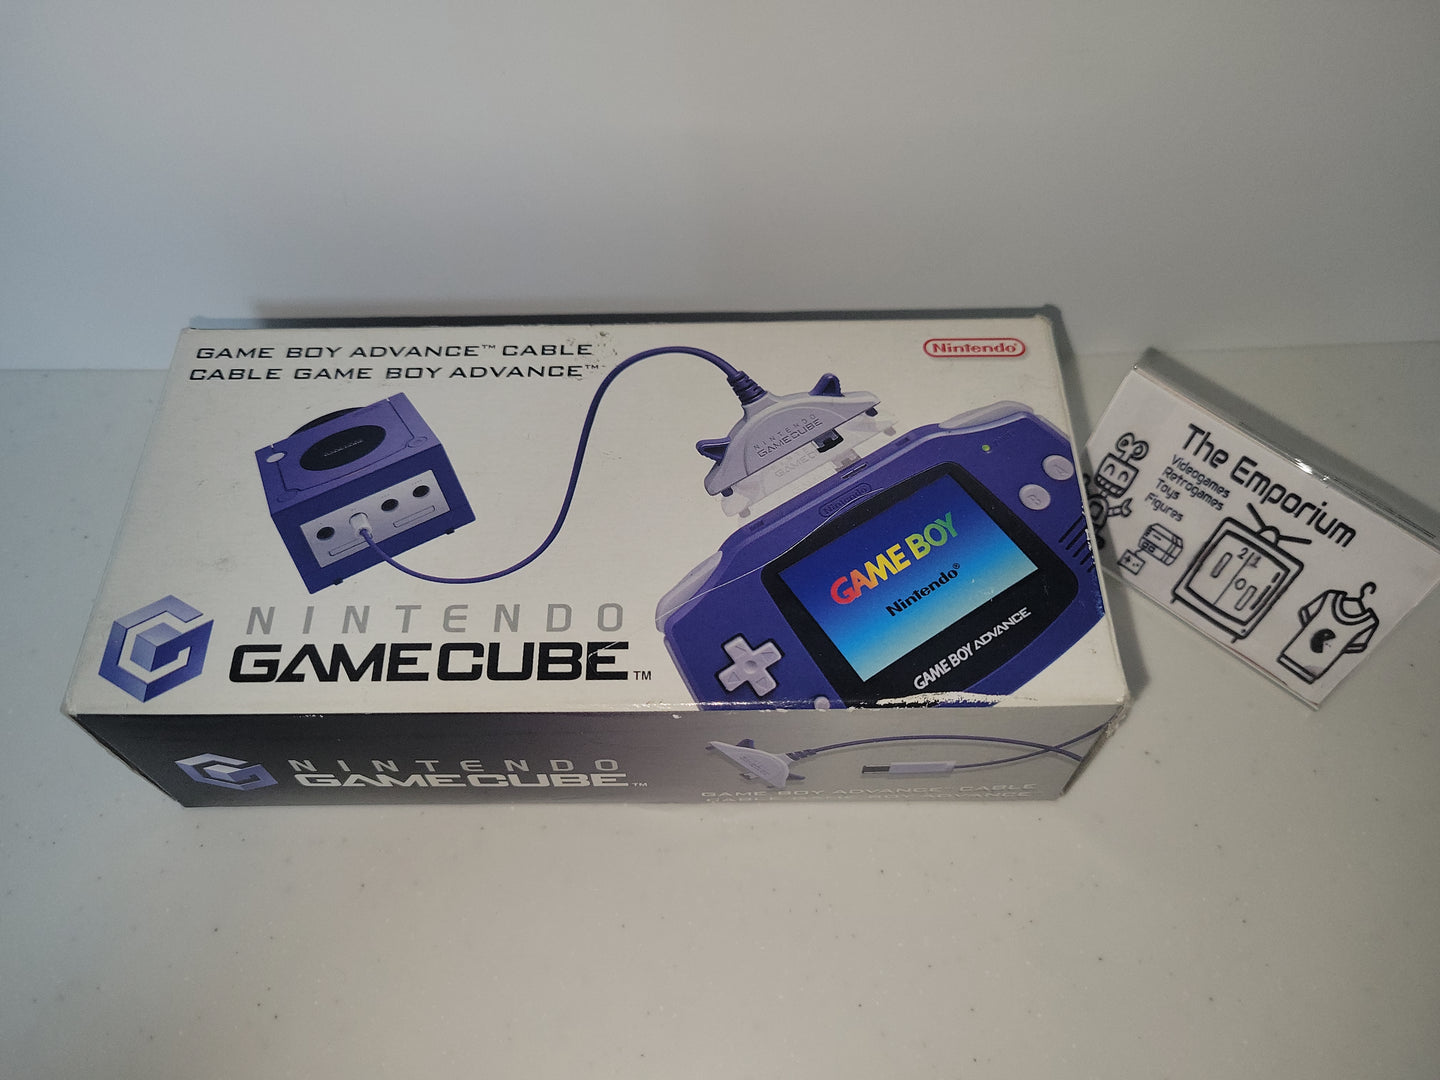 GameBoy Advance to GameCube Connection Cable - Nintendo GameCube GC NGC